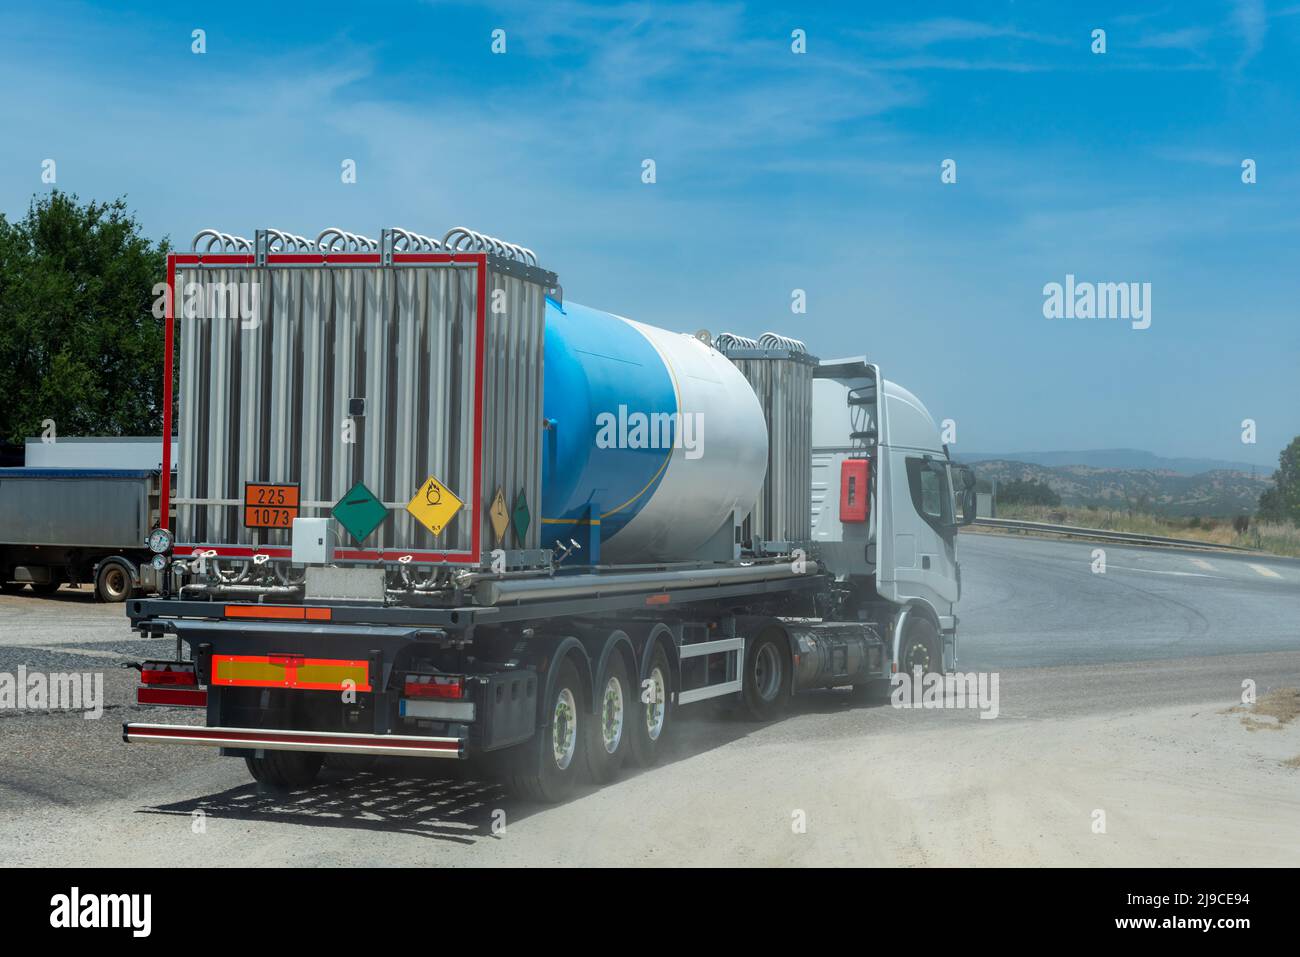 Tank truck for the transport of cryogenic gases, liquid oxygen, with coolers to maintain low temperatures. Stock Photo